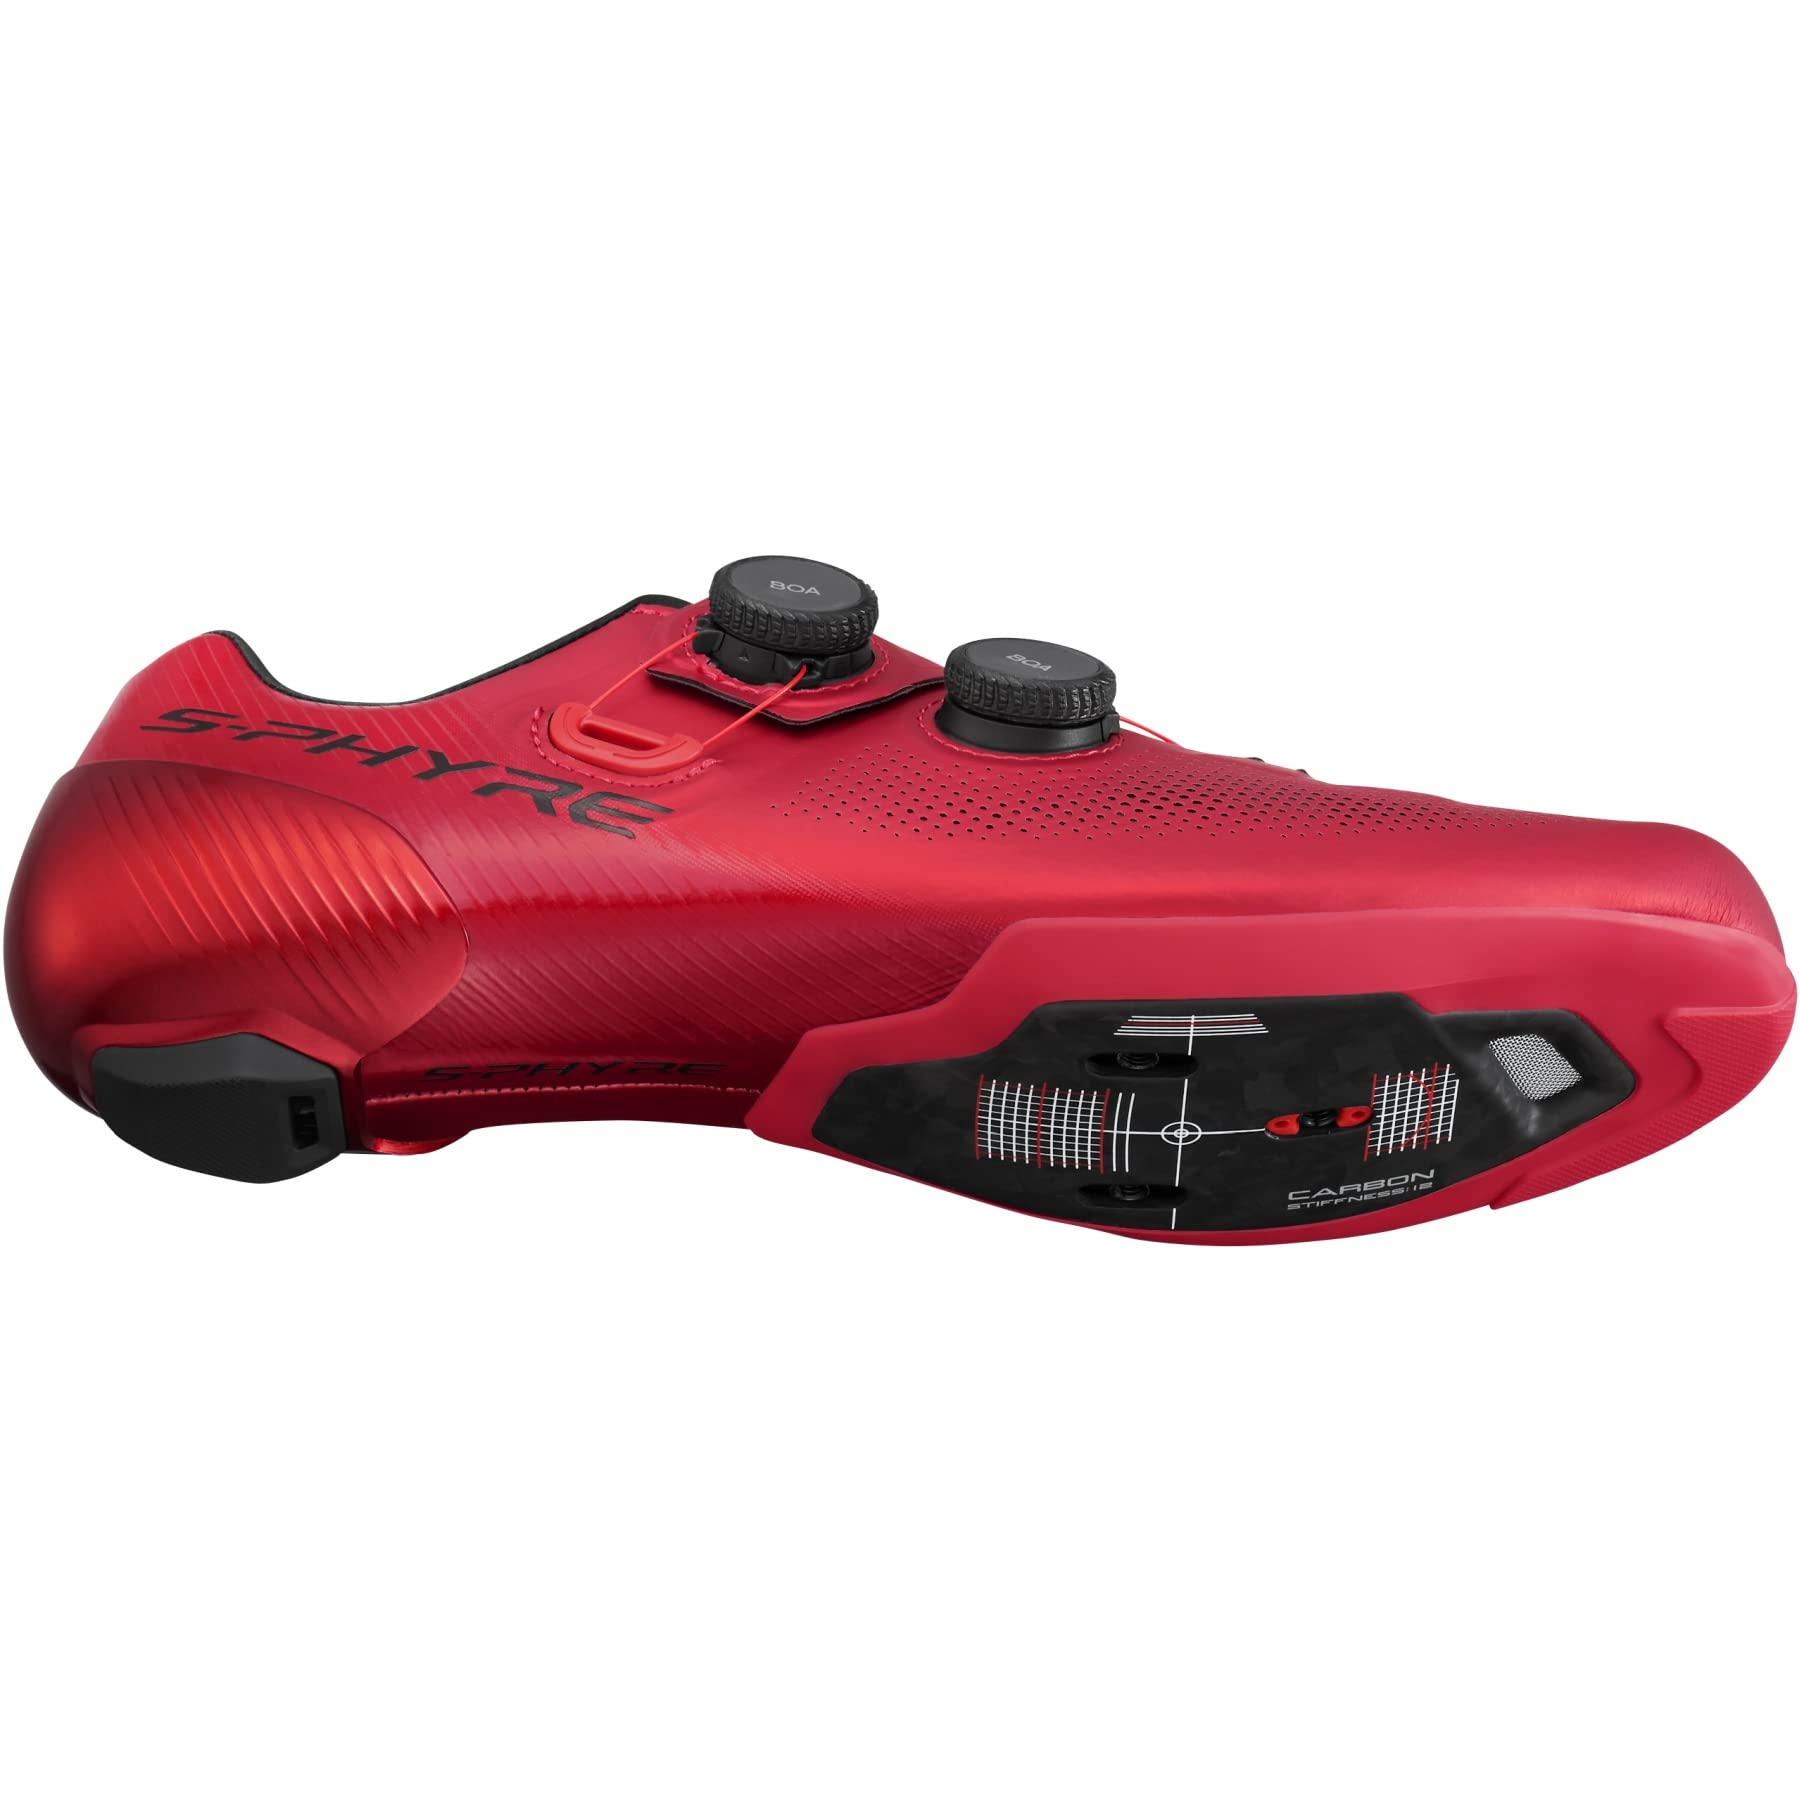 SHIMANO Men's Modern S-PHYRE RC9 (RC903) Shoes, Red, Size, 47 EU